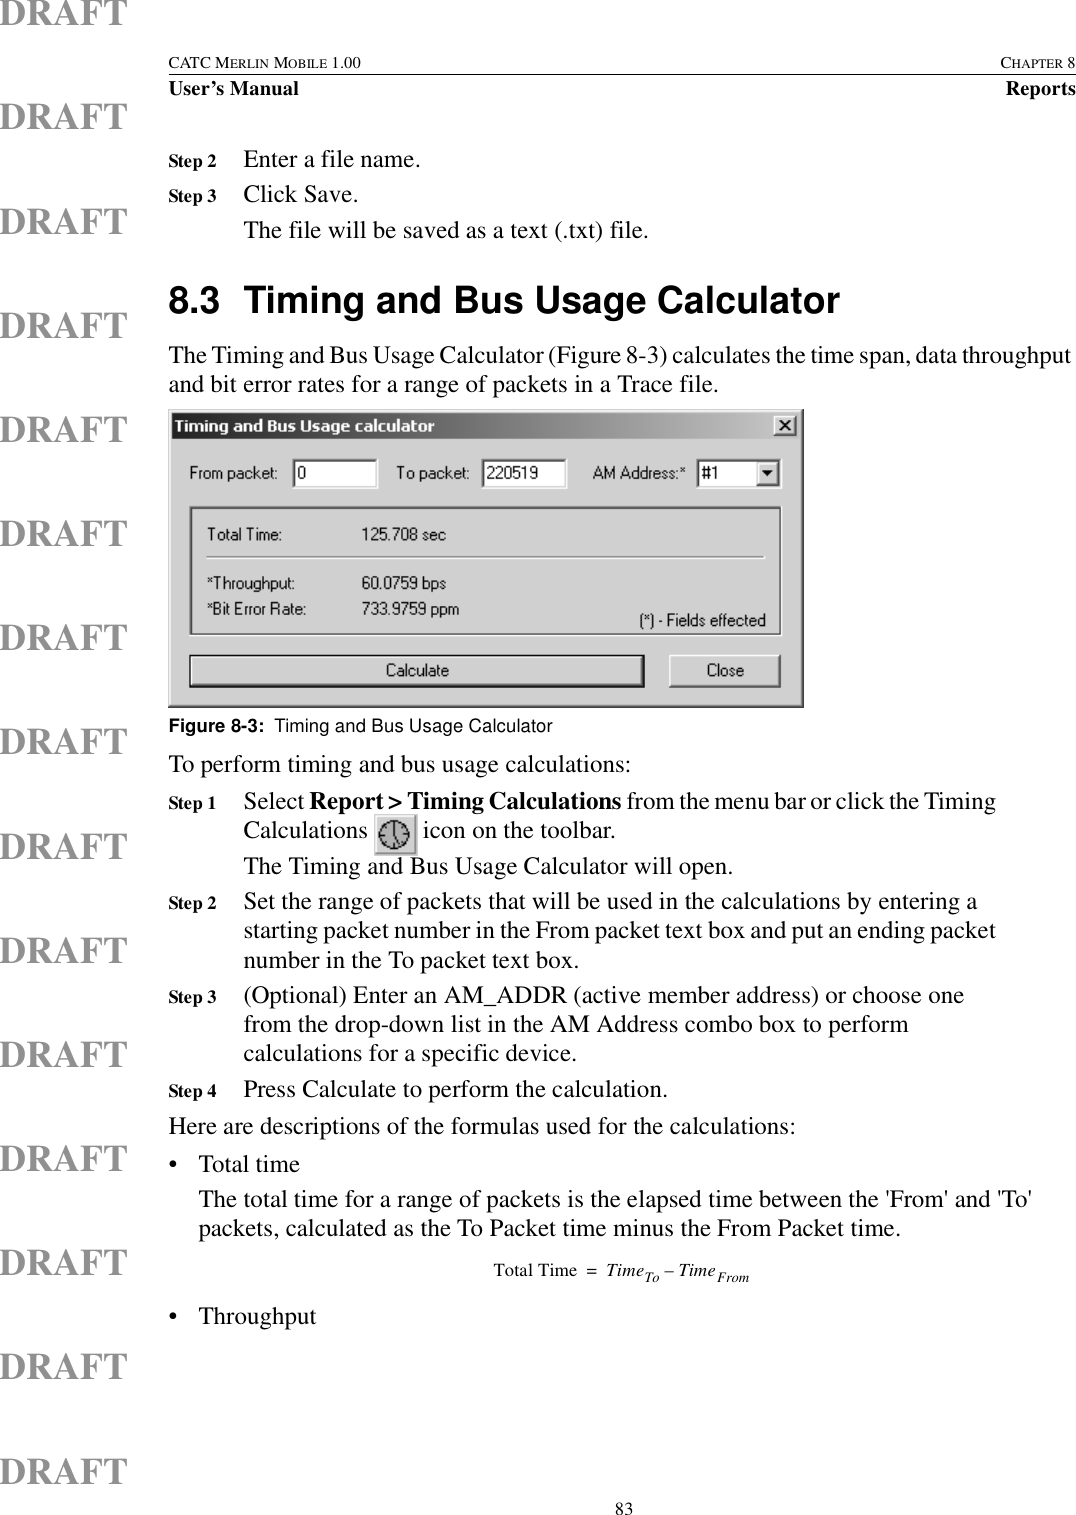  83CATC MERLIN MOBILE 1.00 CHAPTER 8User’s Manual ReportsDRAFTDRAFTDRAFTDRAFTDRAFTDRAFTDRAFTDRAFTDRAFTDRAFTDRAFTDRAFTDRAFTDRAFTDRAFTStep 2 Enter a file name.Step 3 Click Save.The file will be saved as a text (.txt) file.8.3 Timing and Bus Usage CalculatorThe Timing and Bus Usage Calculator (Figure 8-3) calculates the time span, data throughput and bit error rates for a range of packets in a Trace file.To perform timing and bus usage calculations:Step 1 Select Report &gt; Timing Calculations from the menu bar or click the Timing Calculations   icon on the toolbar.The Timing and Bus Usage Calculator will open.Step 2 Set the range of packets that will be used in the calculations by entering a starting packet number in the From packet text box and put an ending packet number in the To packet text box.Step 3 (Optional) Enter an AM_ADDR (active member address) or choose one from the drop-down list in the AM Address combo box to perform calculations for a specific device.Step 4 Press Calculate to perform the calculation.Here are descriptions of the formulas used for the calculations:• Total timeThe total time for a range of packets is the elapsed time between the &apos;From&apos; and &apos;To&apos; packets, calculated as the To Packet time minus the From Packet time. • ThroughputFigure 8-3:  Timing and Bus Usage CalculatorTotal Time TimeTo TimeFrom–=